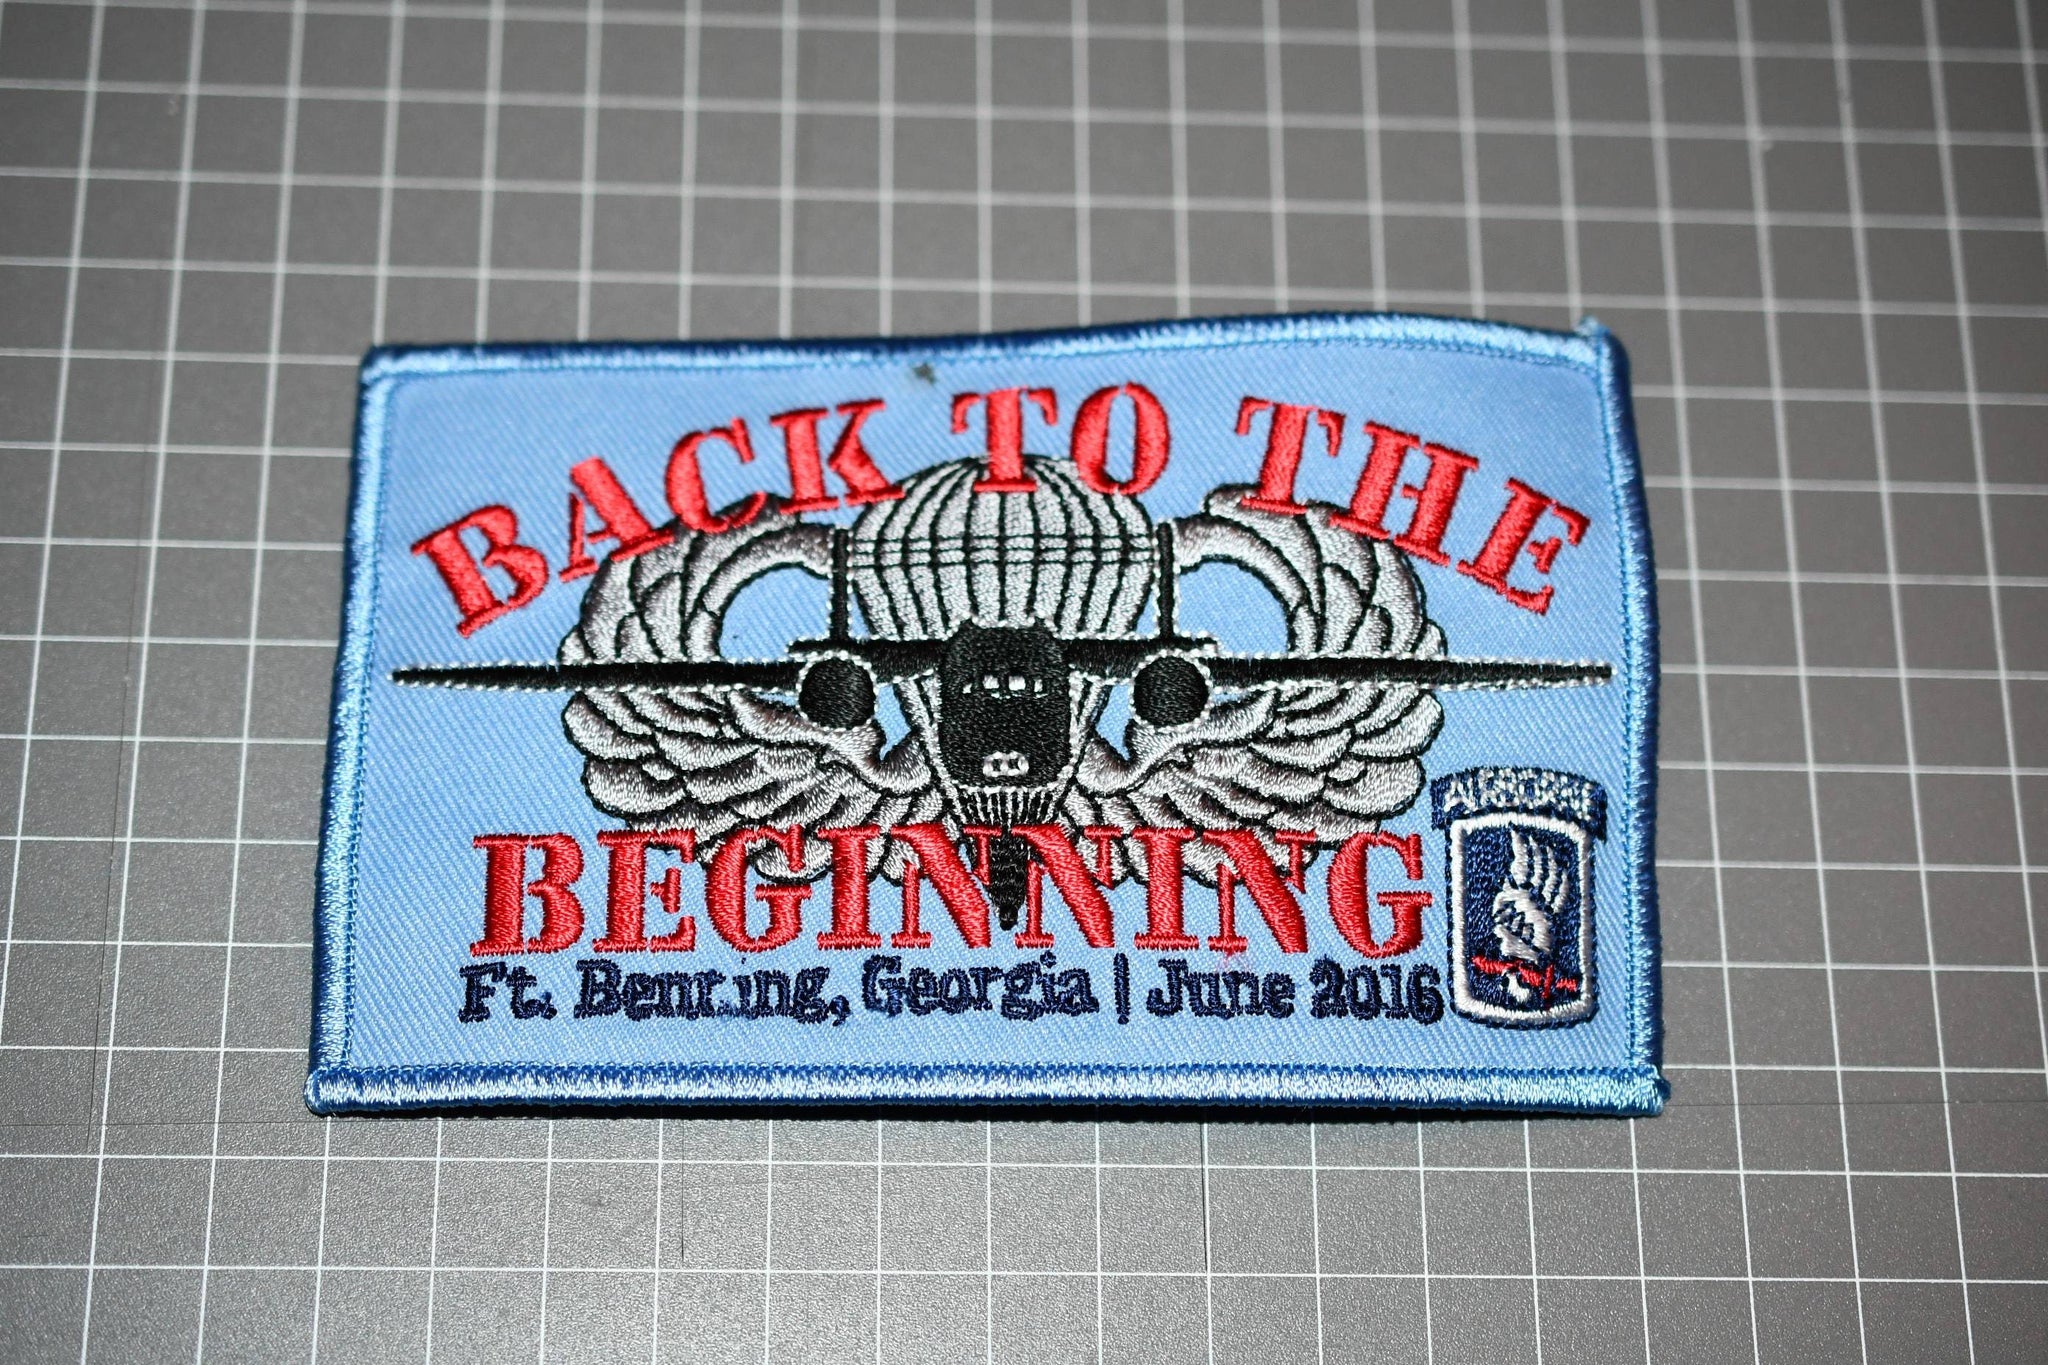 United States Army Airborne "Back To The Beginning" 2016 Patch (B9)